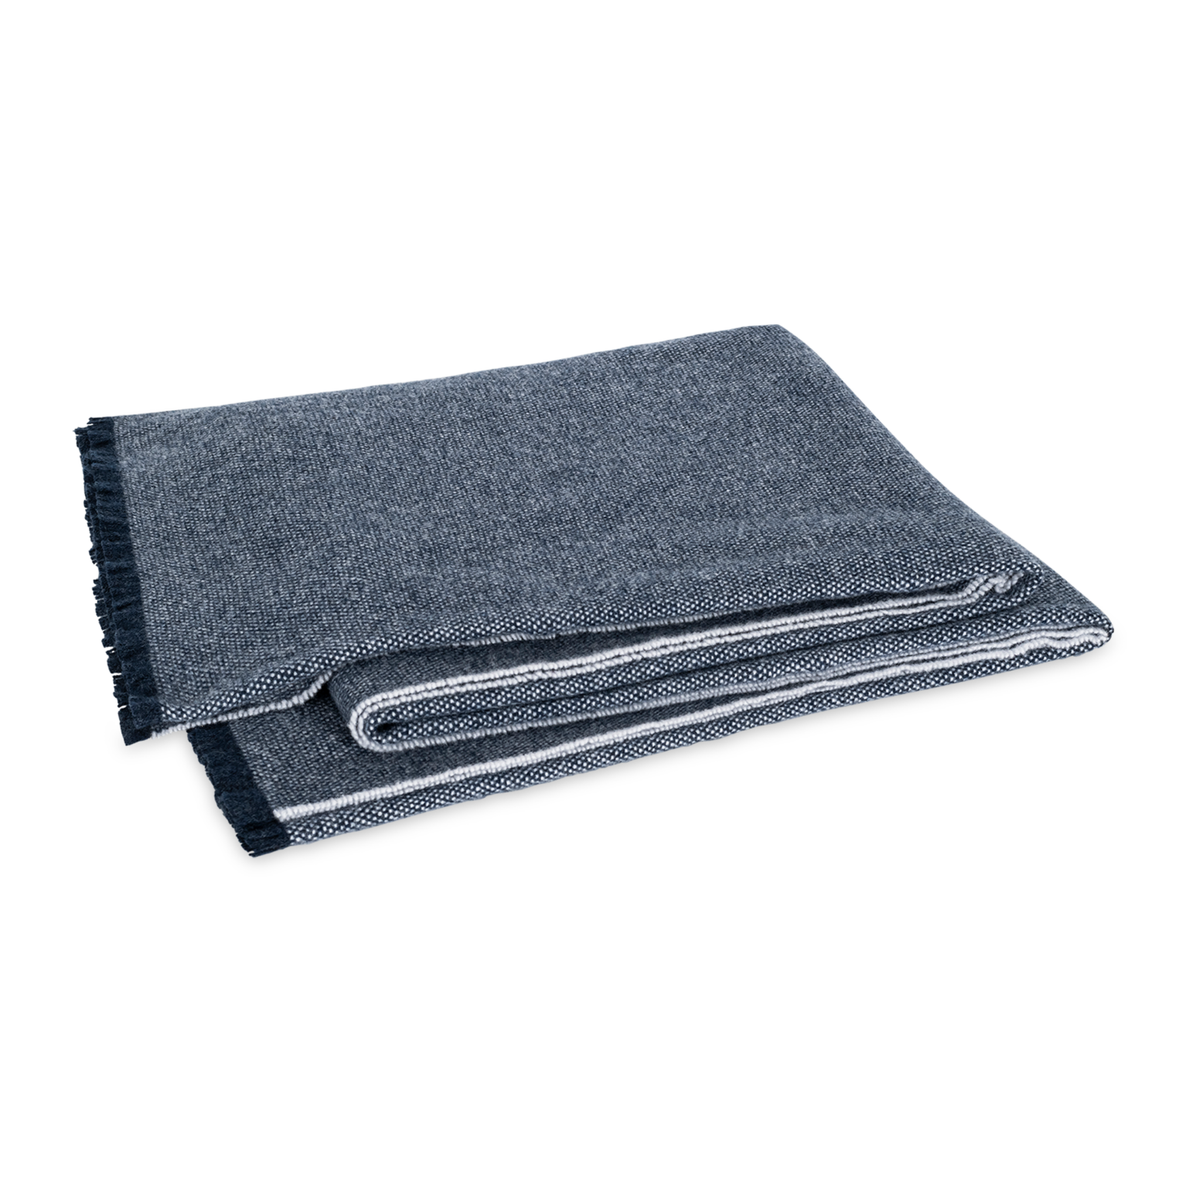 Folded Matouk Agnes Throw in Midnight Blue Color Against White Background